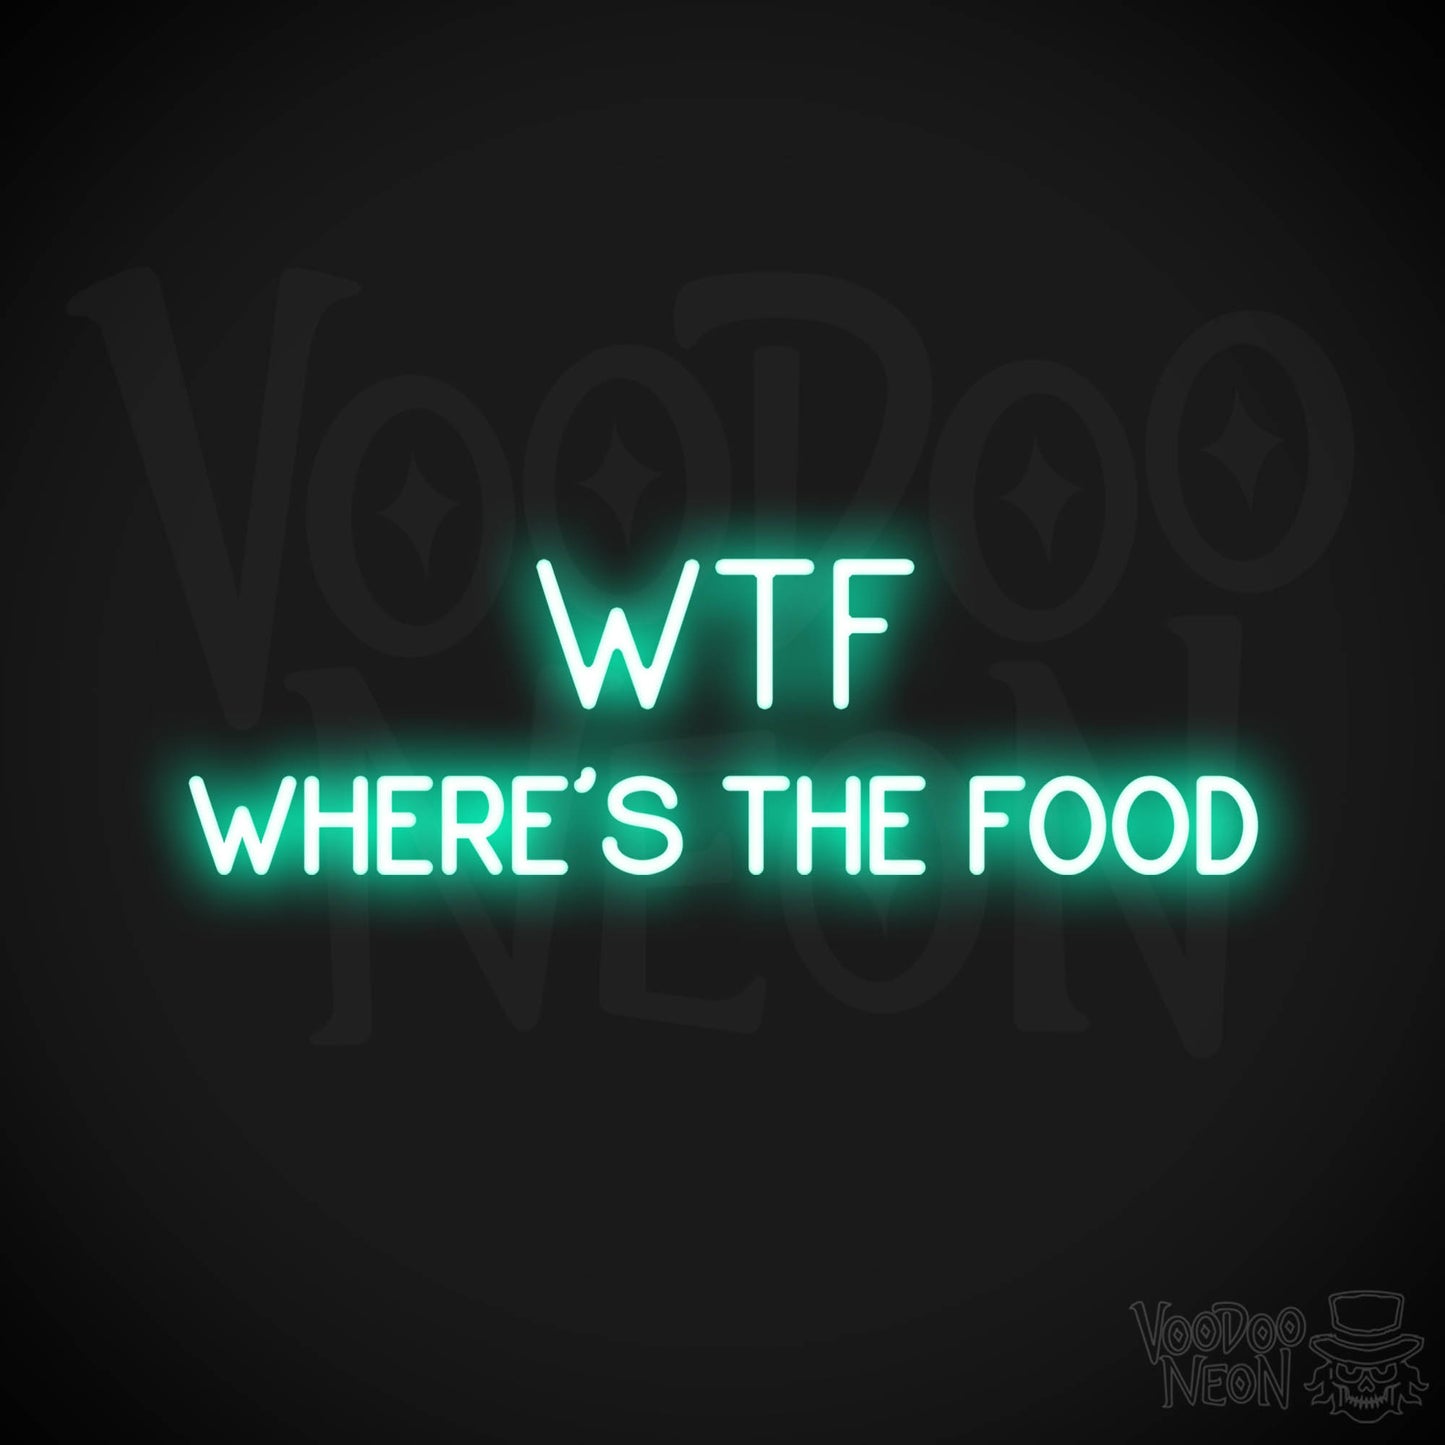 Wtf (Wheres The Food) LED Neon - Light Green